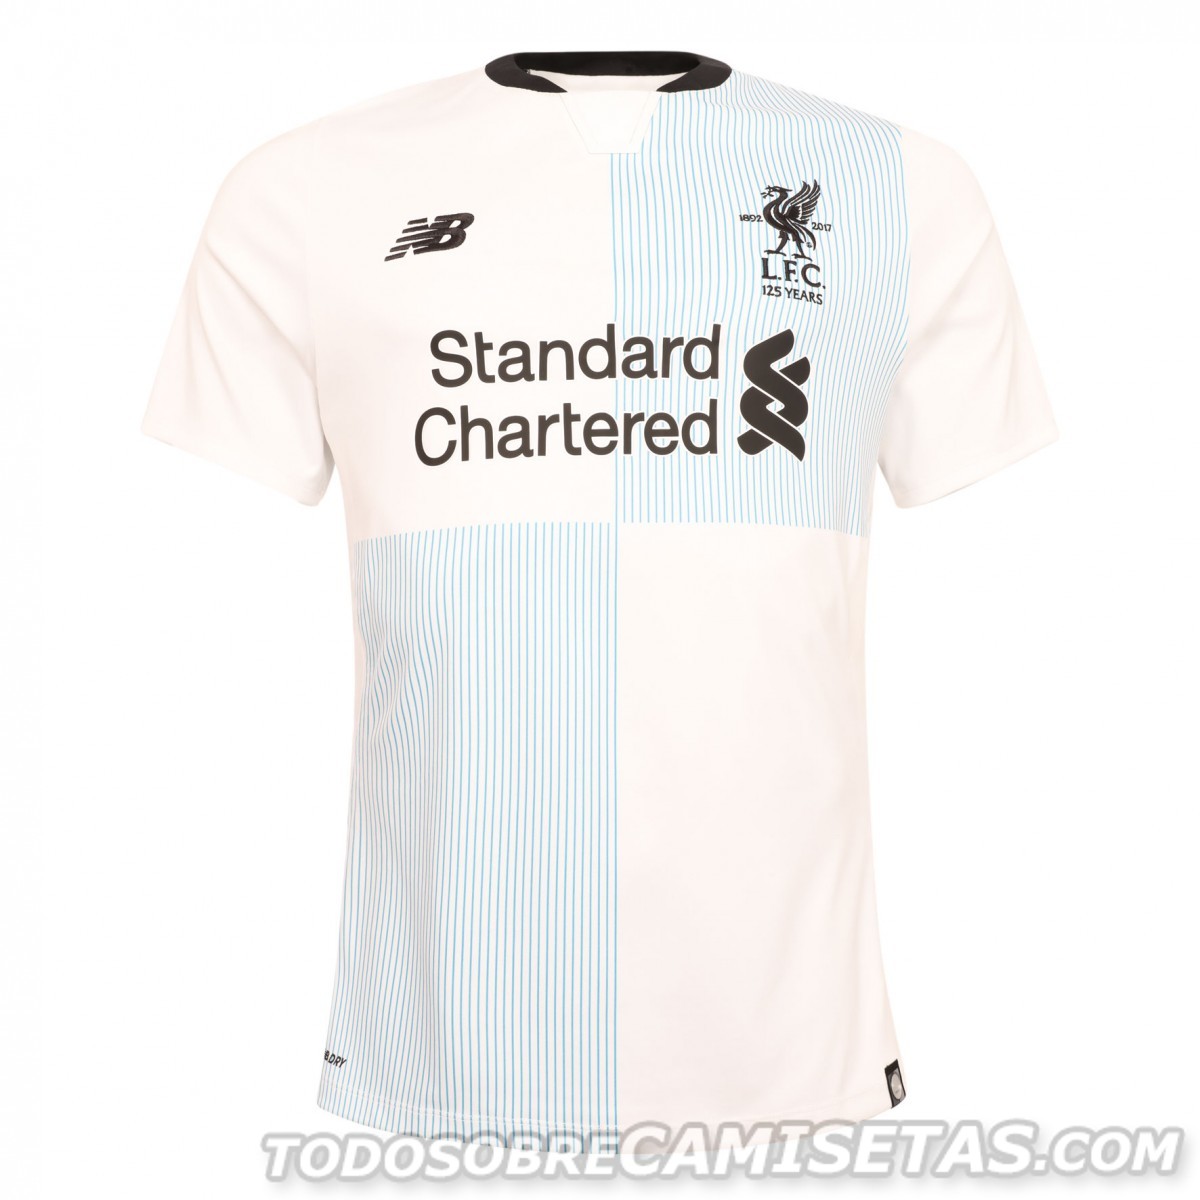 Liverpool FC 2017-18 Away Kit Limited Edition